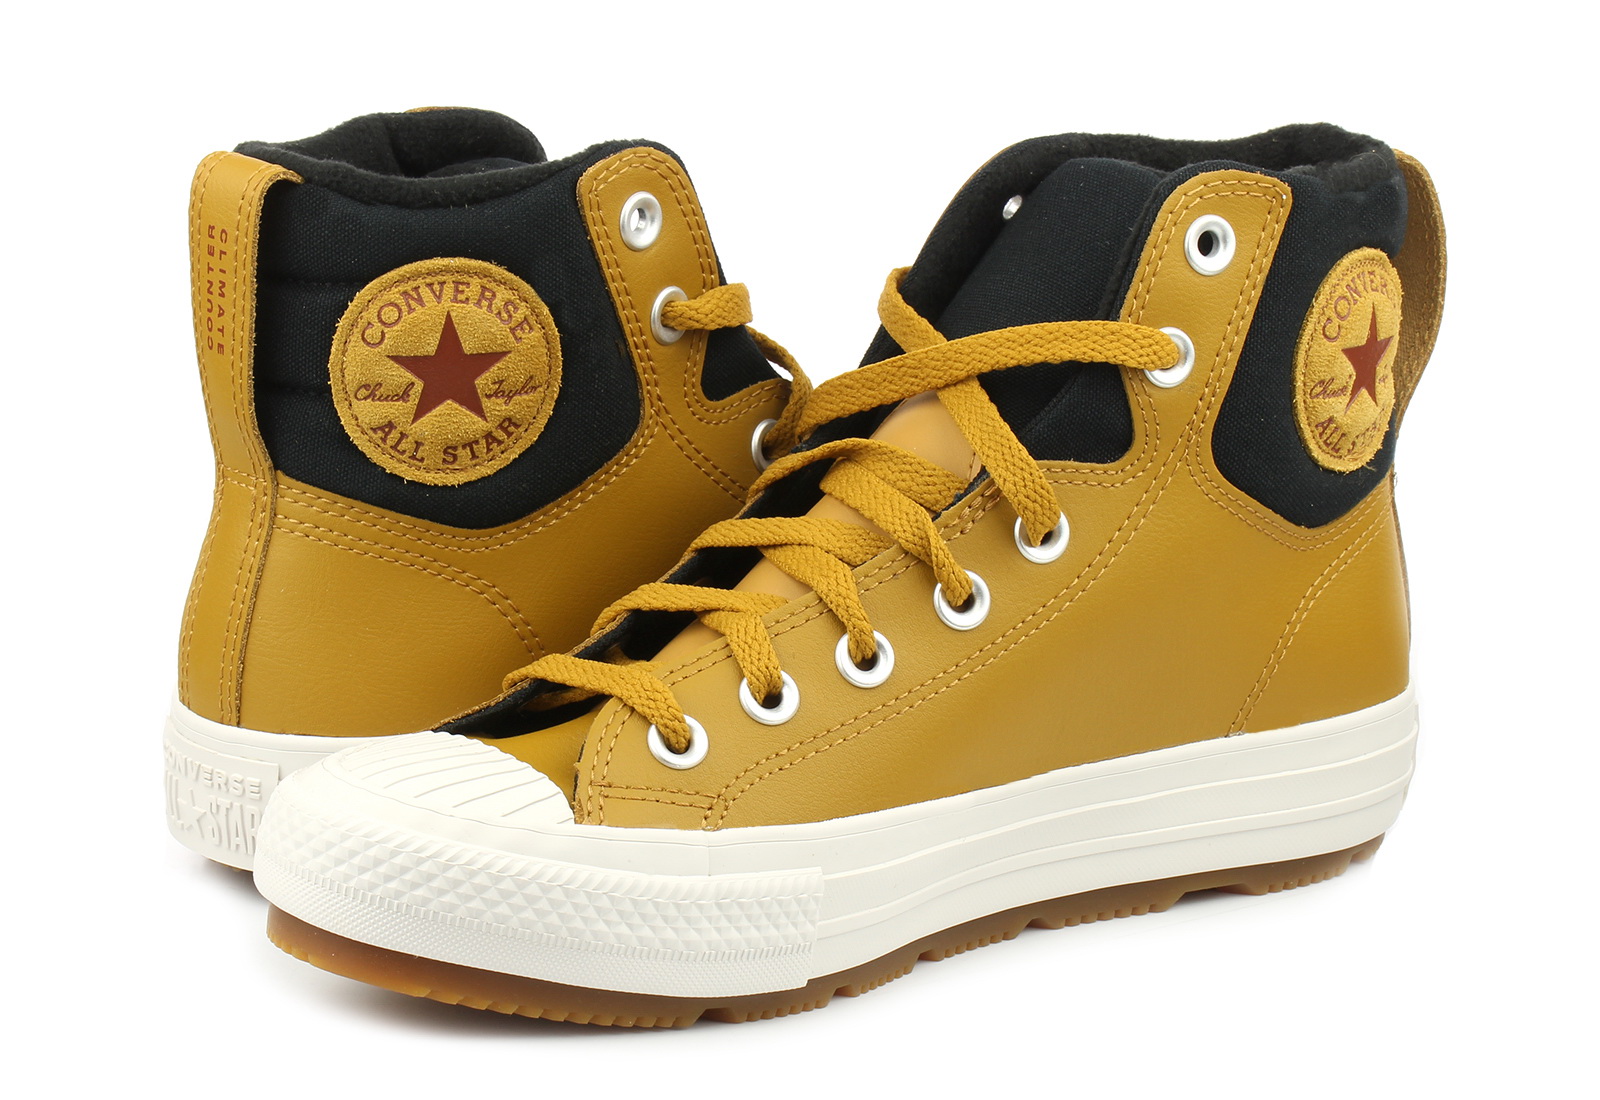 converse boots all star